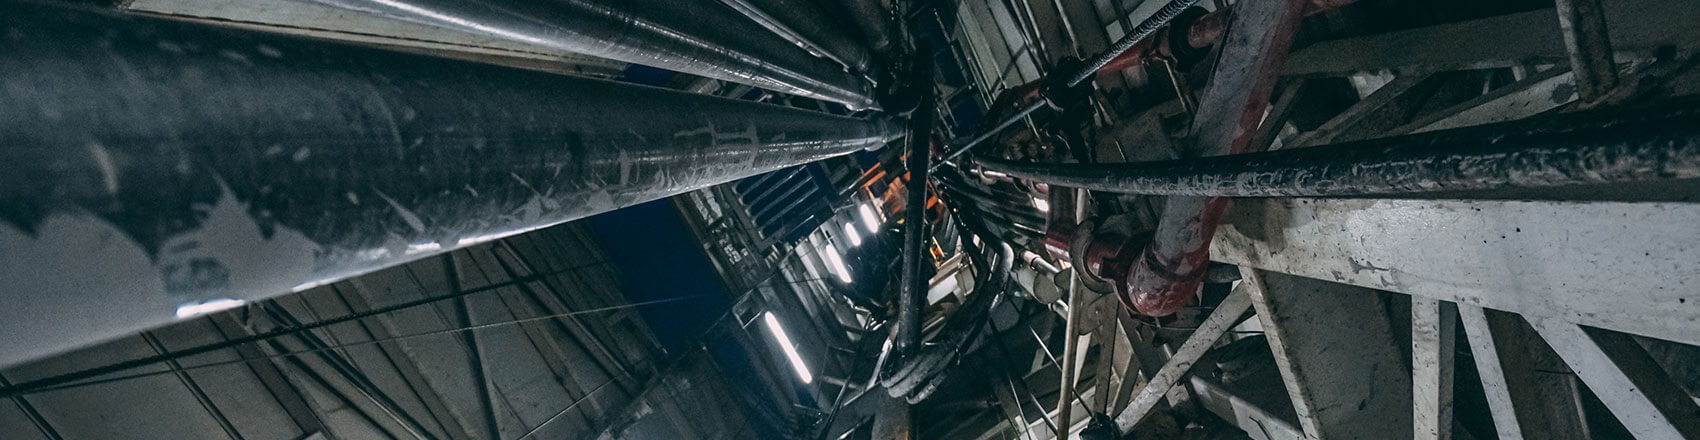 View of Rig from inside, looking up.